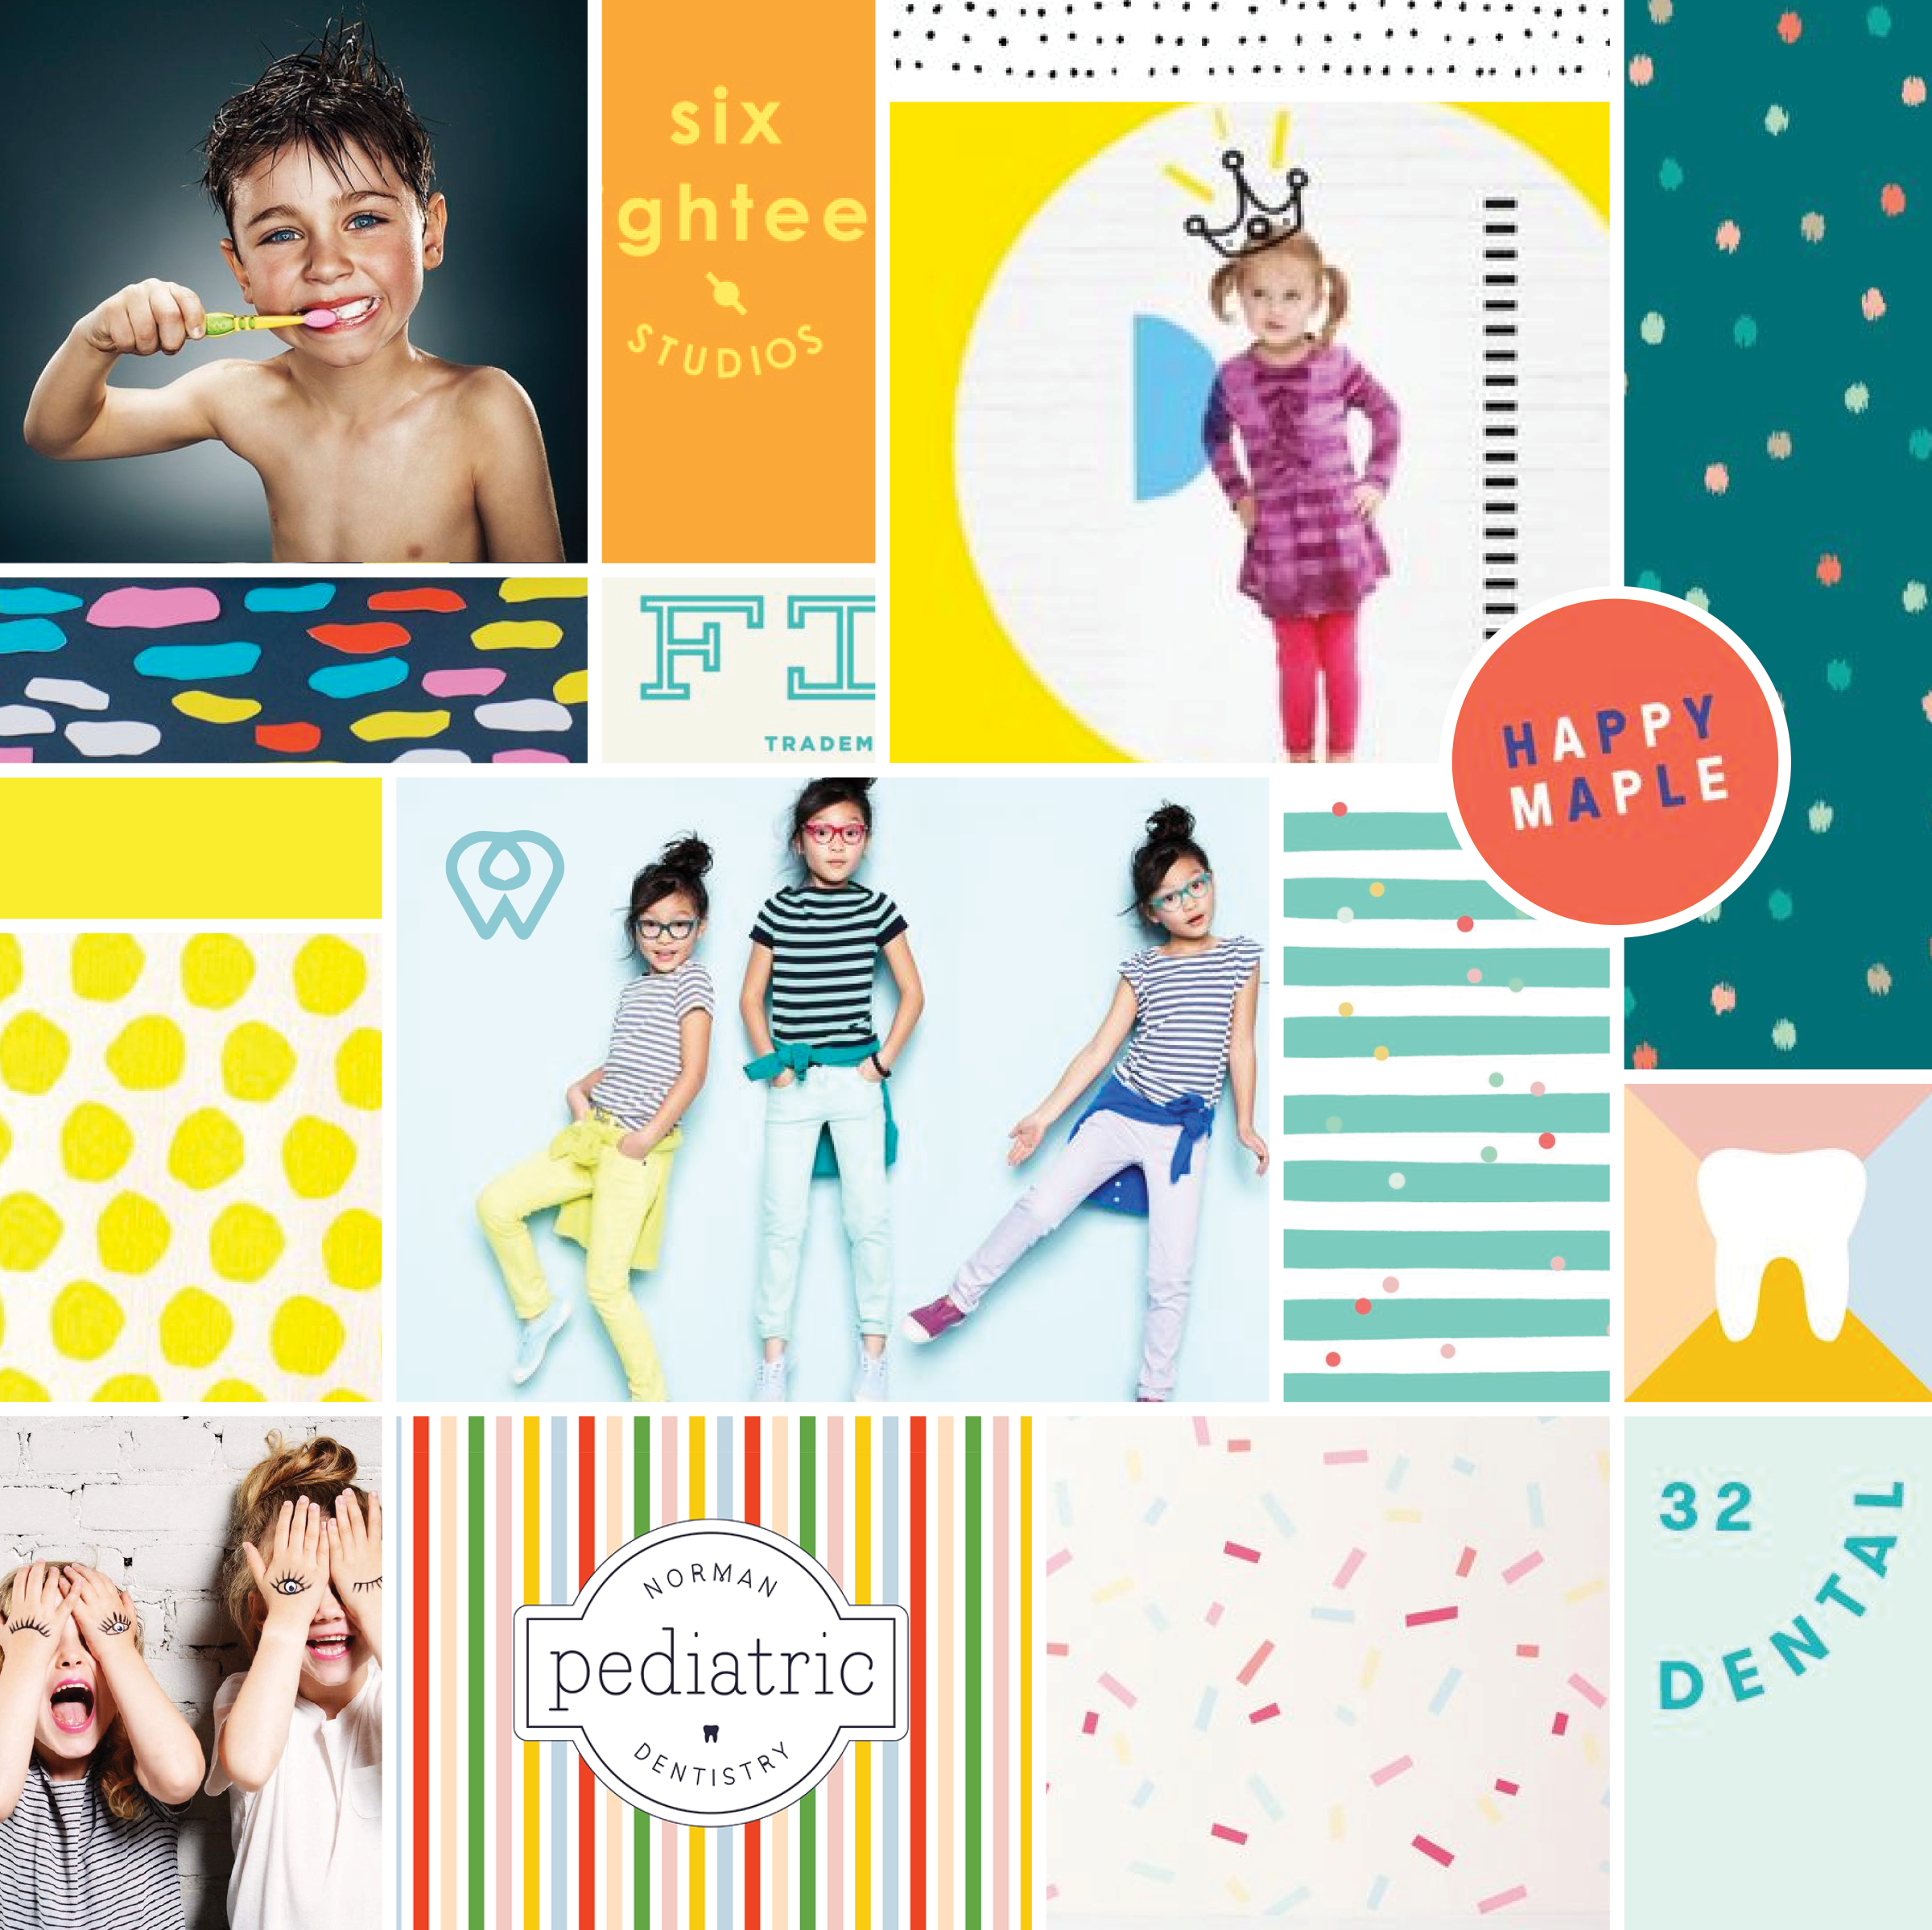 visual brand vibe: modern, fresh, approachable + trusted